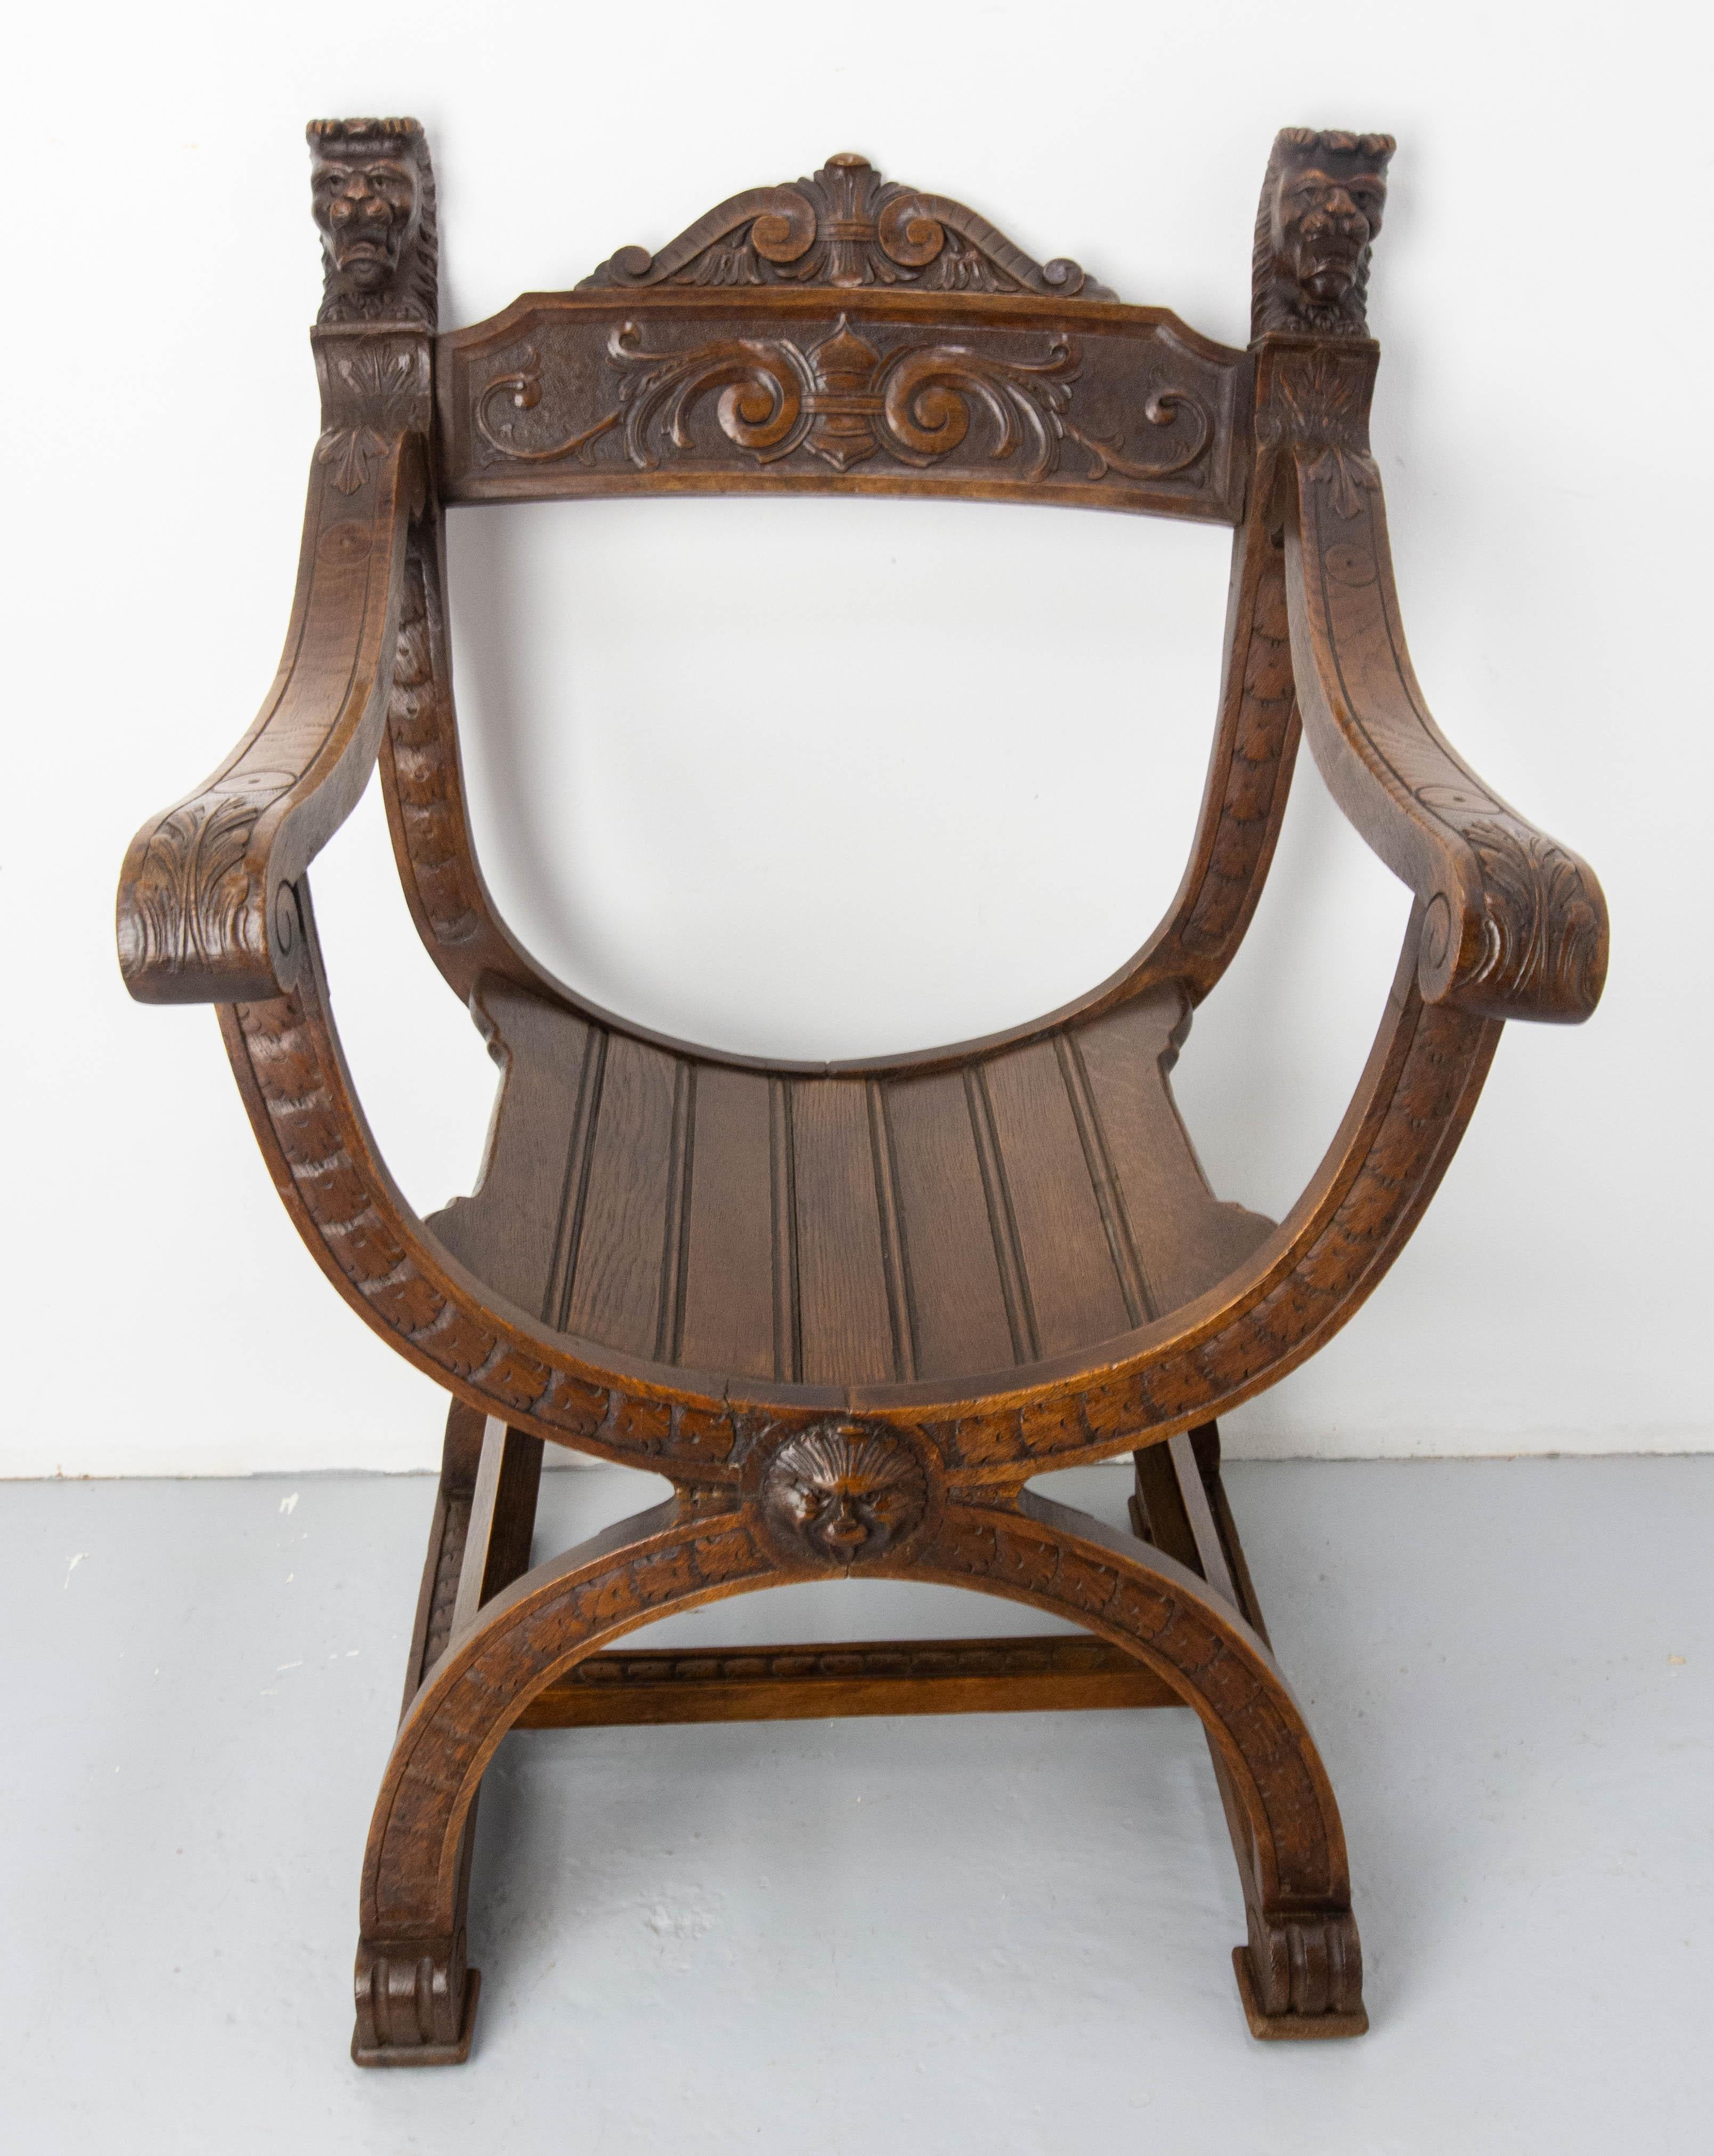 French Armchair carved in the neogothic style. This type of armchair is called a curule armchair, in reference to the Roman period, or a Dagobert armchair.
Nature-inspired furniture is typical of the Art Nouveau period.
The lion heads are